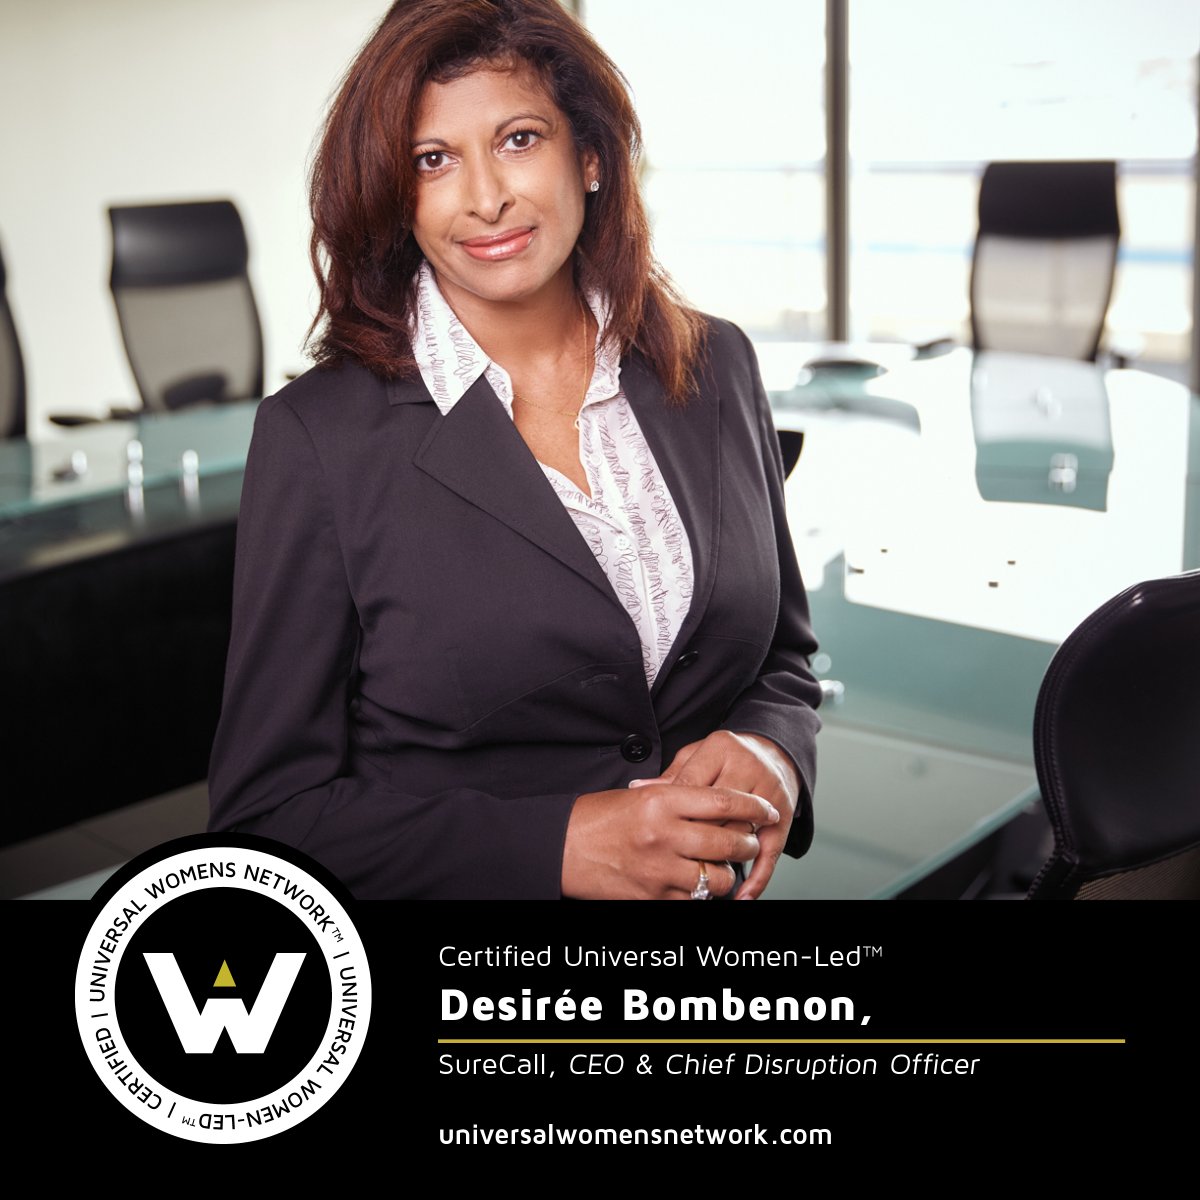 ANNOUNCEMENT? 

⭐️Universal Women-Led™ Certified⭐️ Congrats, Desiree Bombenon, CEO, SureCall.  bit.ly/3SJ3iXb

Everyone plays a role to SupportHER. Buy from women, invest in them and champion them! 

Get Certified ➡️ bit.ly/3xwEfgm

#Womenowned #Womenled